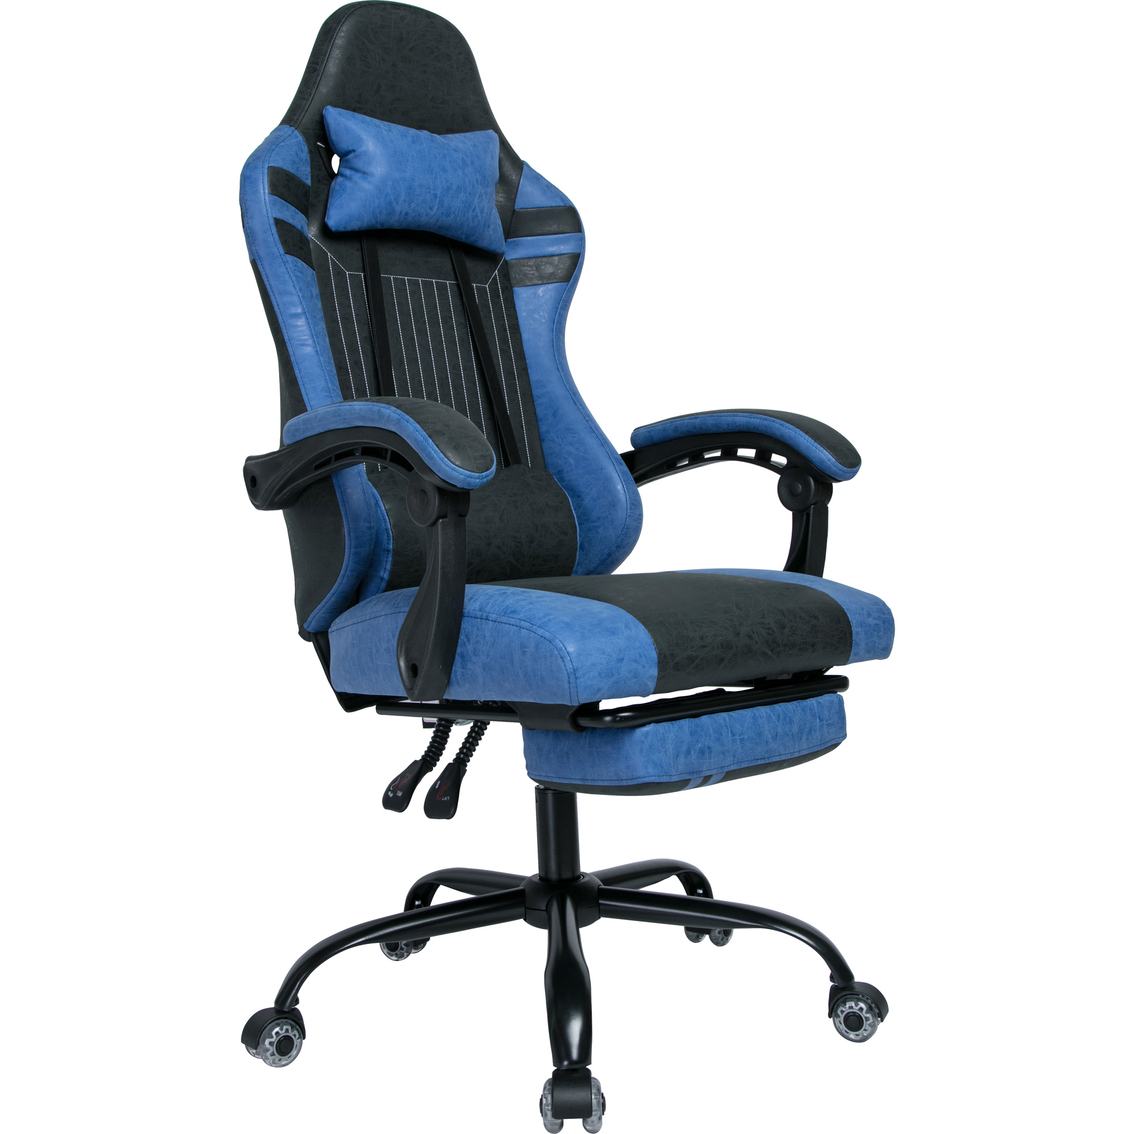 Simply Perfect Racing Style Gaming Chair With Footrest, Antique